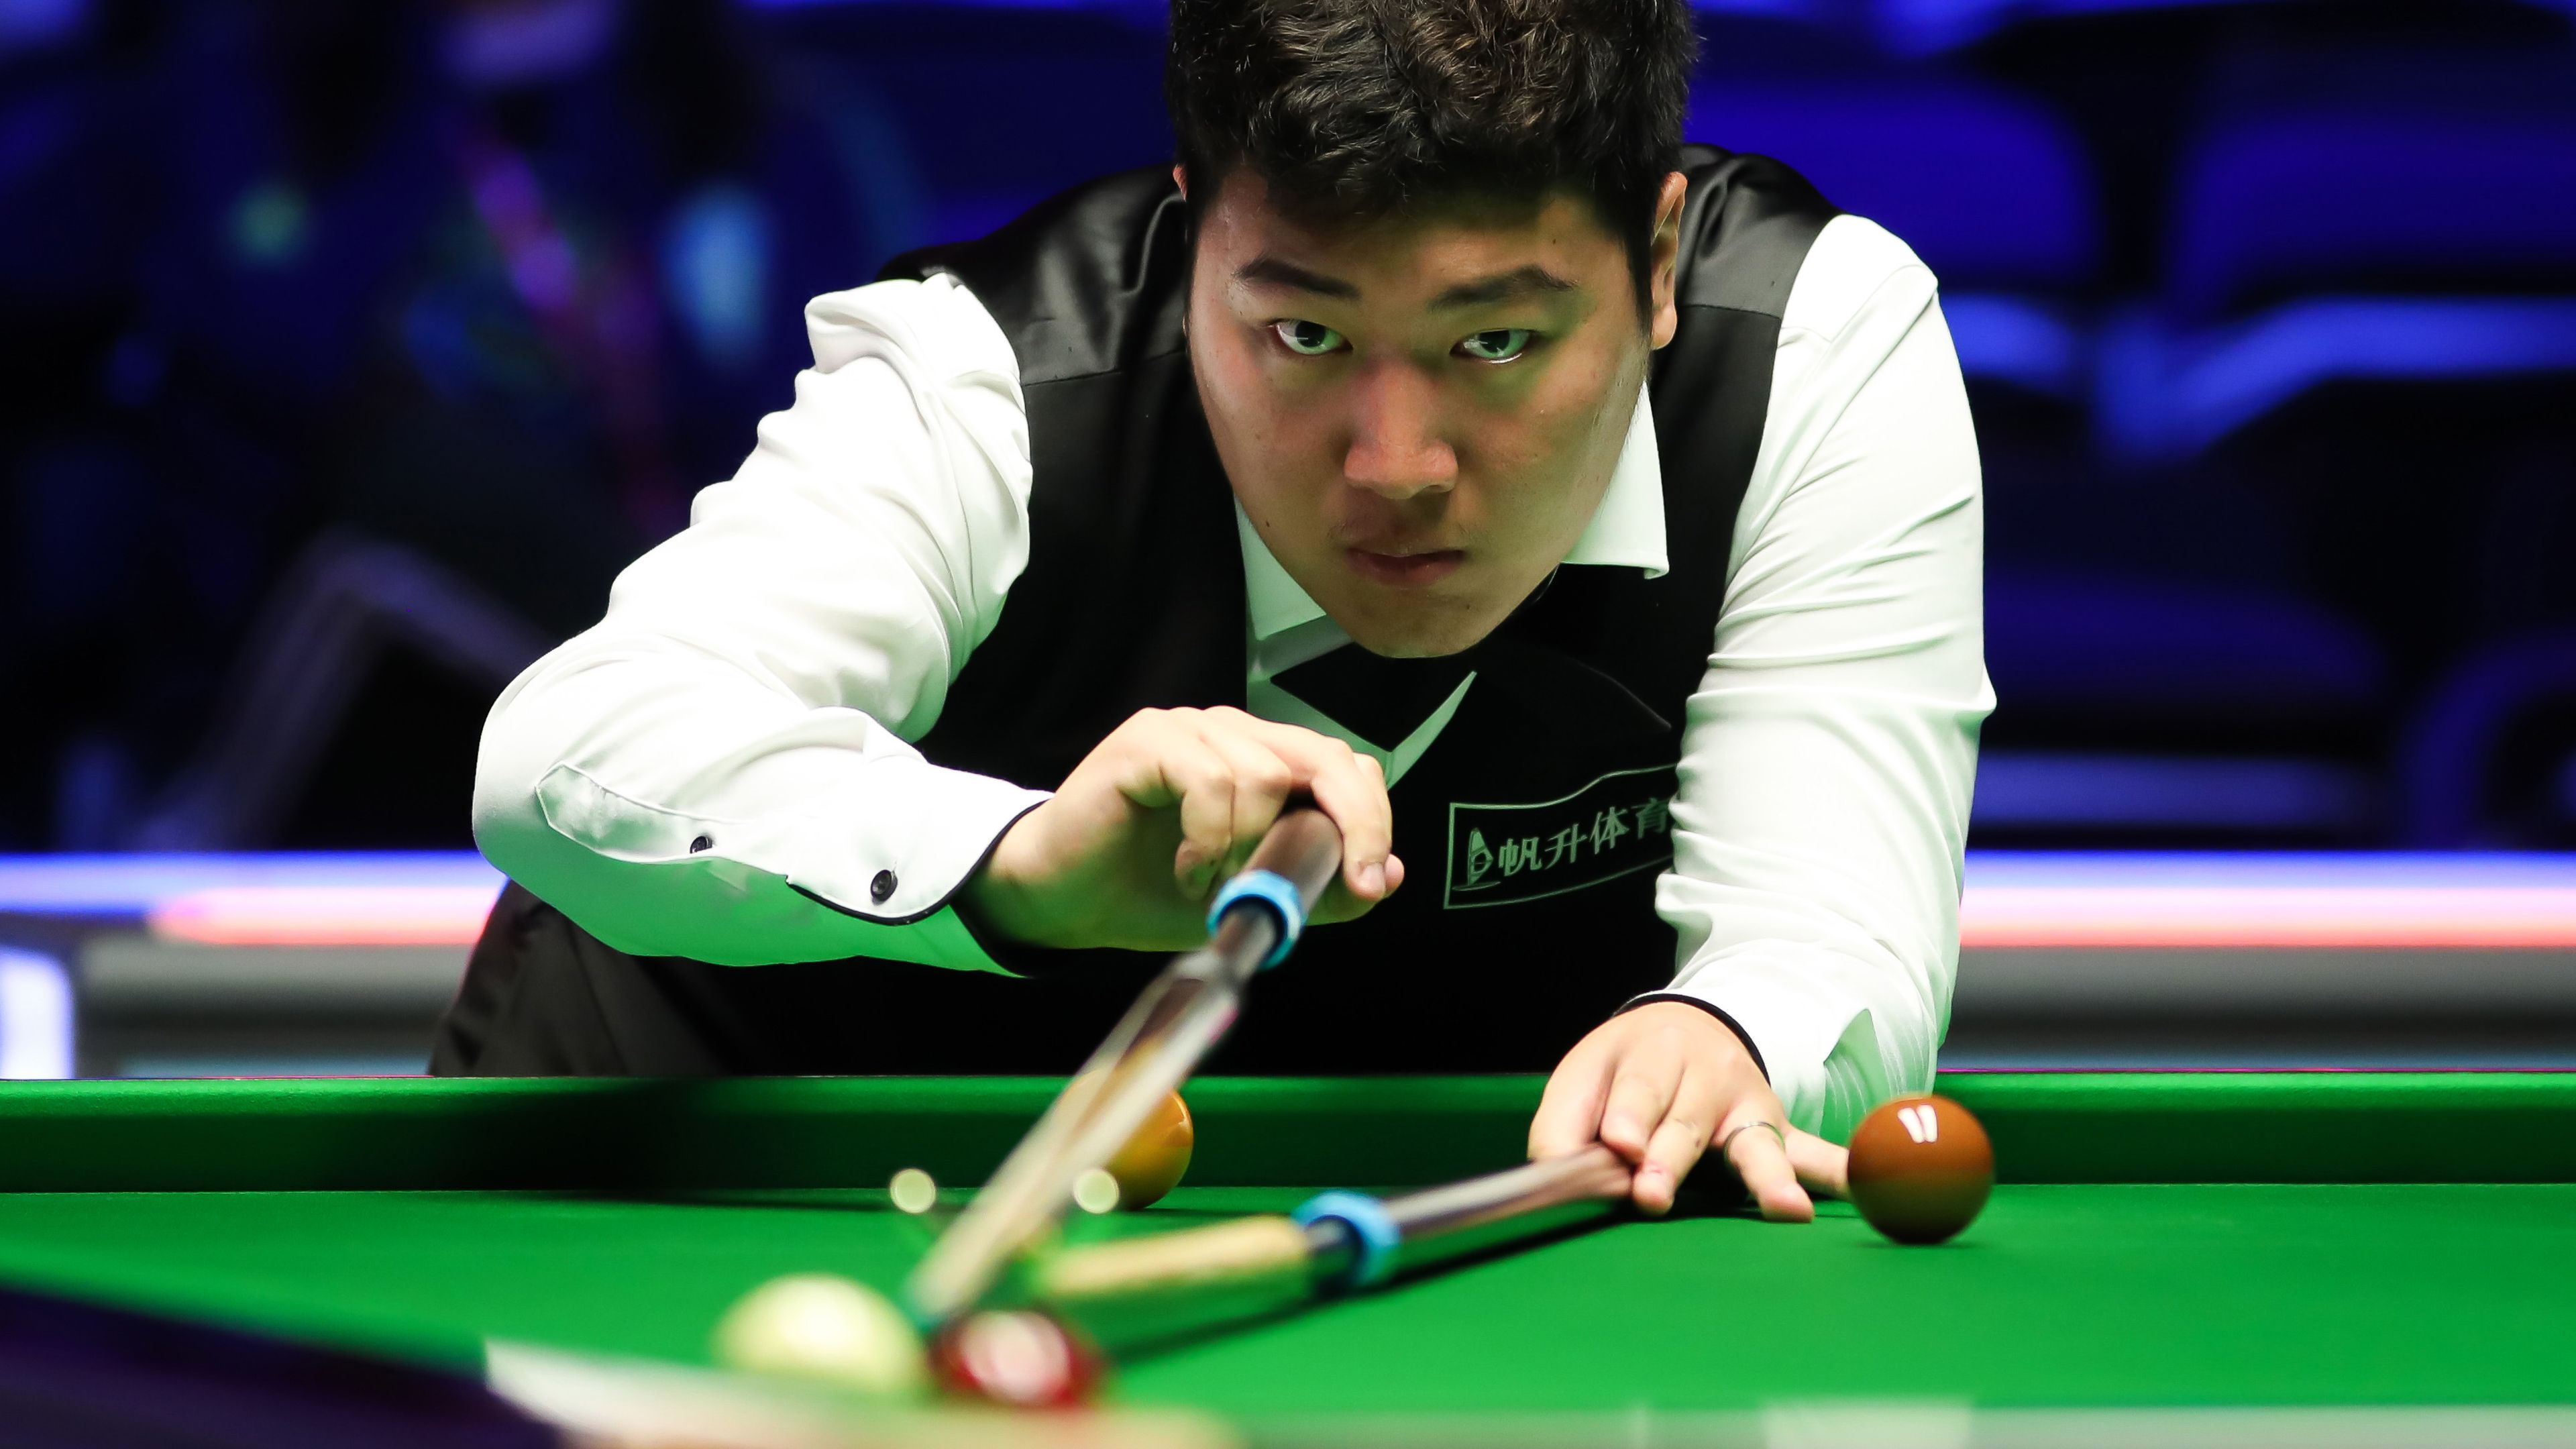 Snooker world reeling after 2021 masters champion Yan Bingtao among seven banned after match-fixing probe